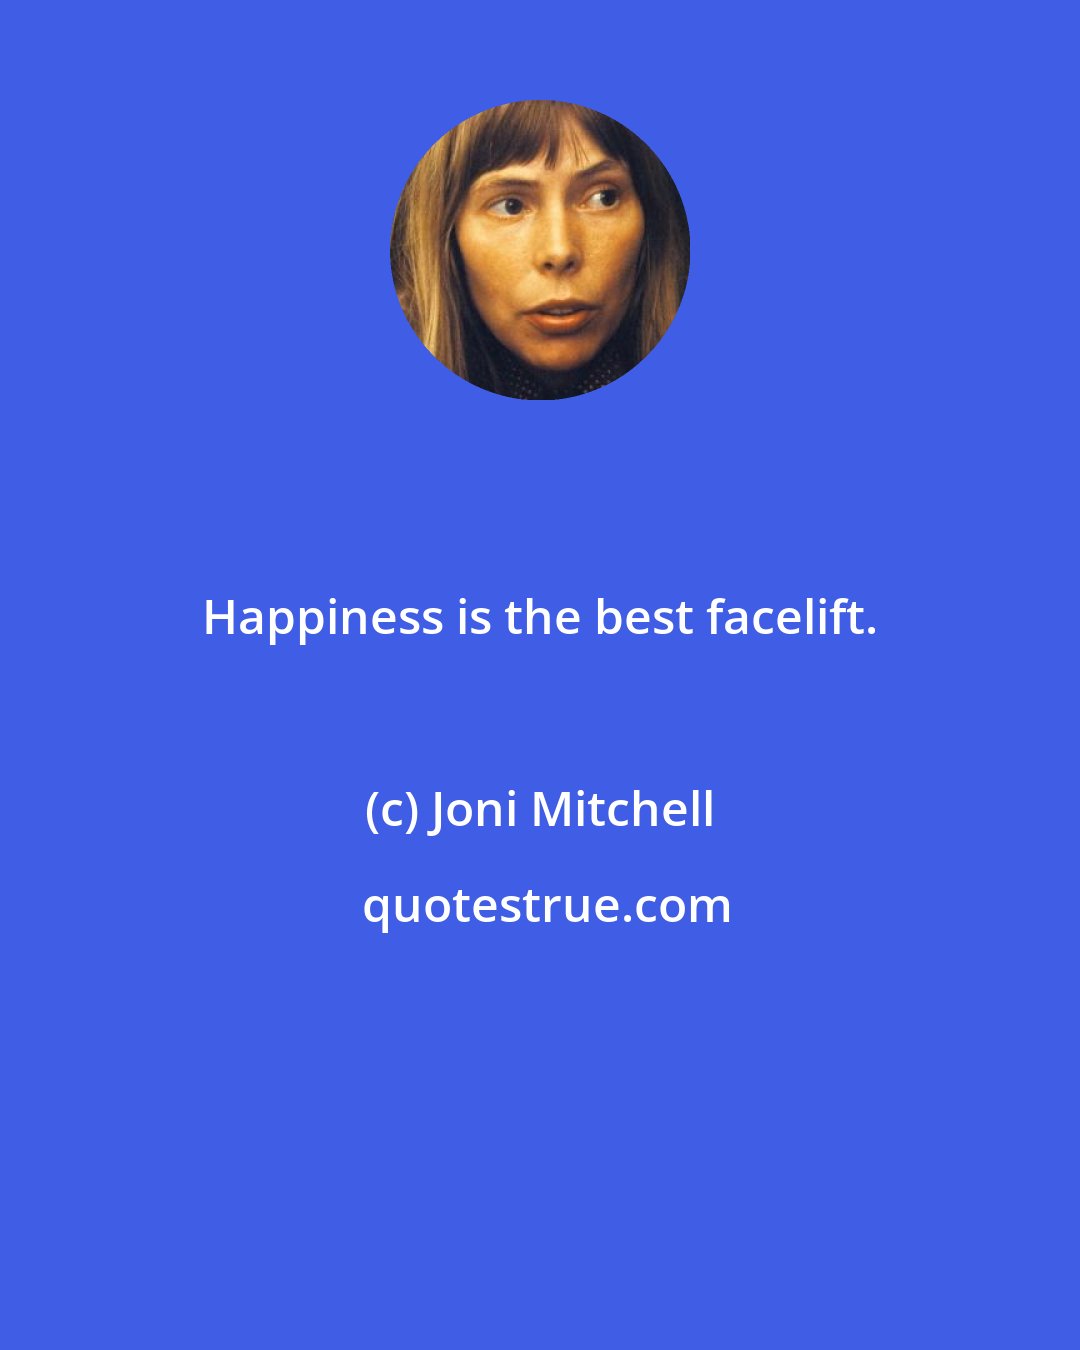 Joni Mitchell: Happiness is the best facelift.